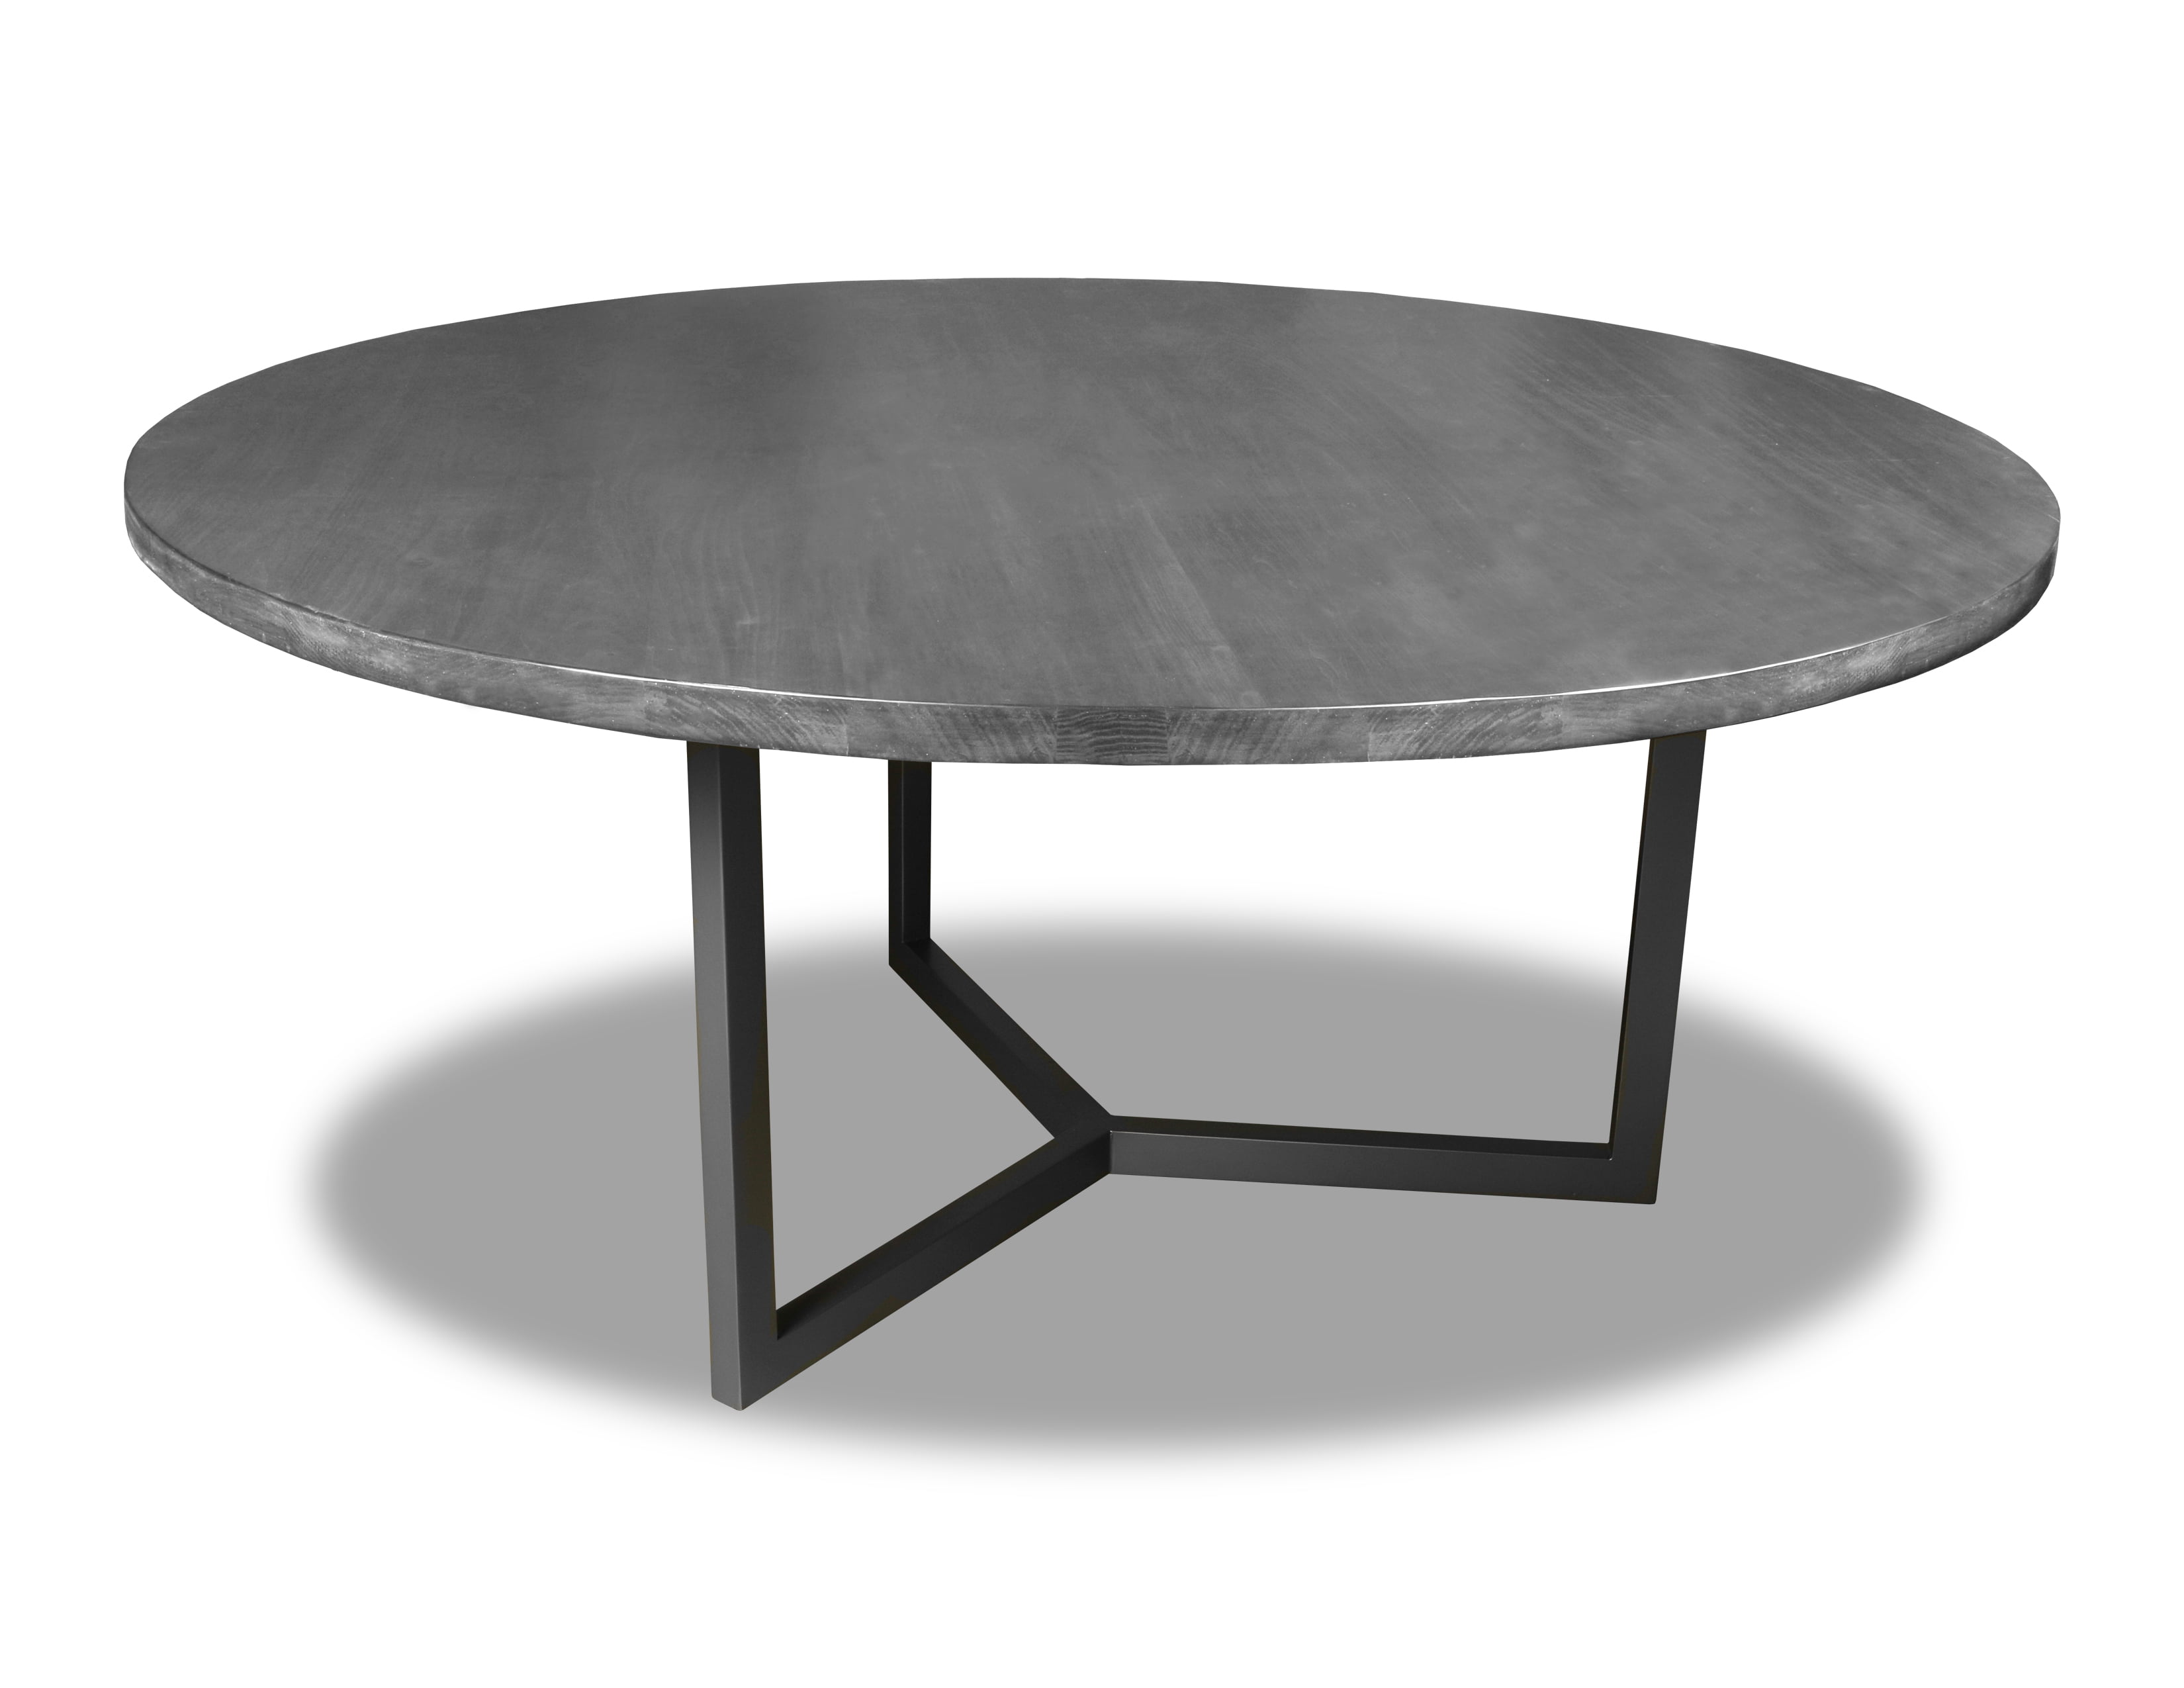 South Cone Home Gales Round Dining, 60 Round Outdoor Concrete Dining Table